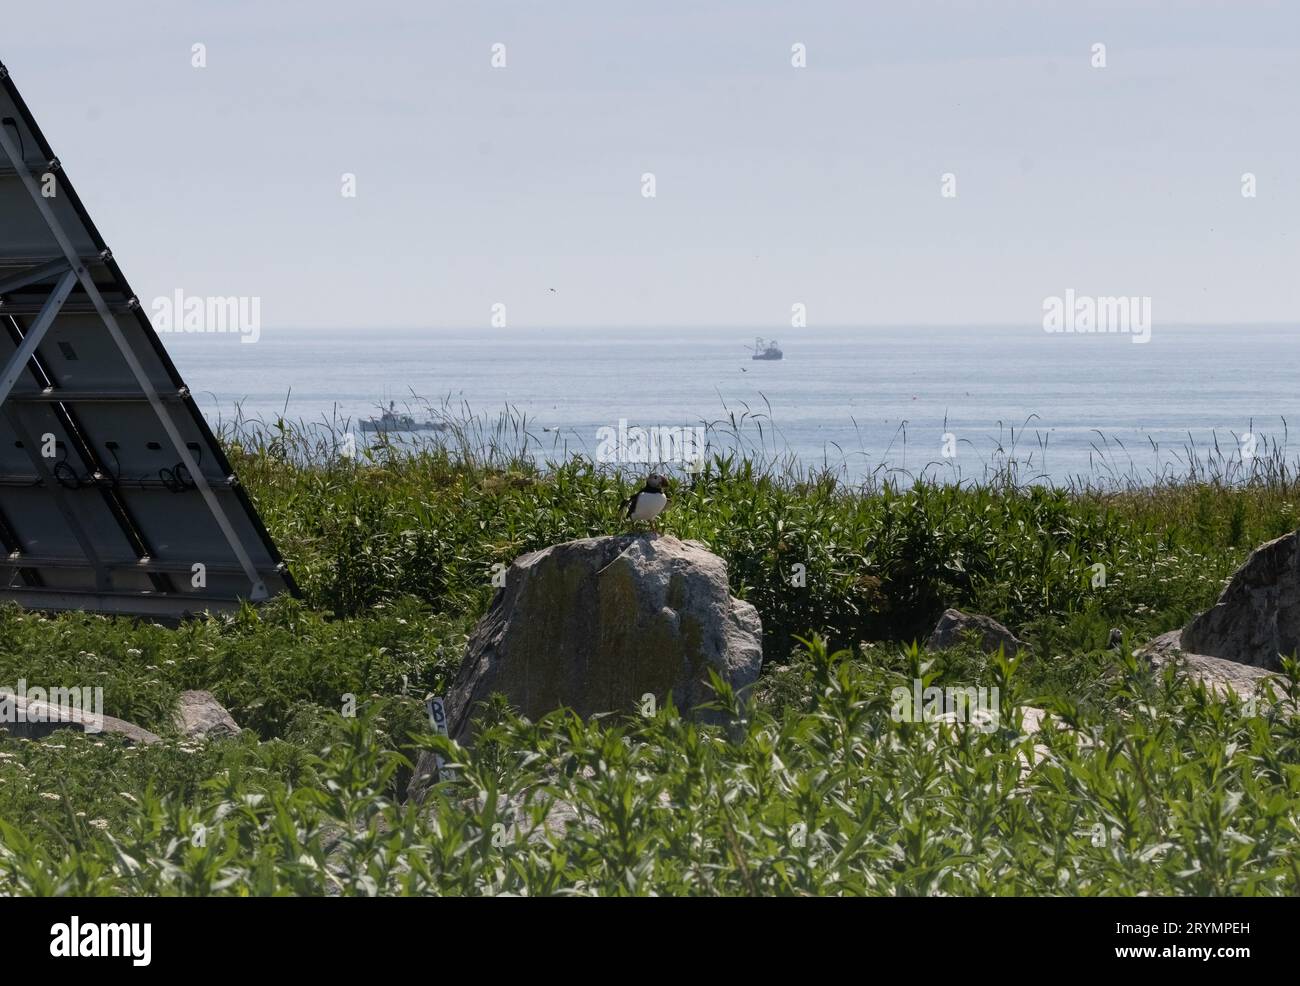 Puffins view from Machias Island out to sea with solar panels, rocks lobster fishing boats in the distance. Stock Photo